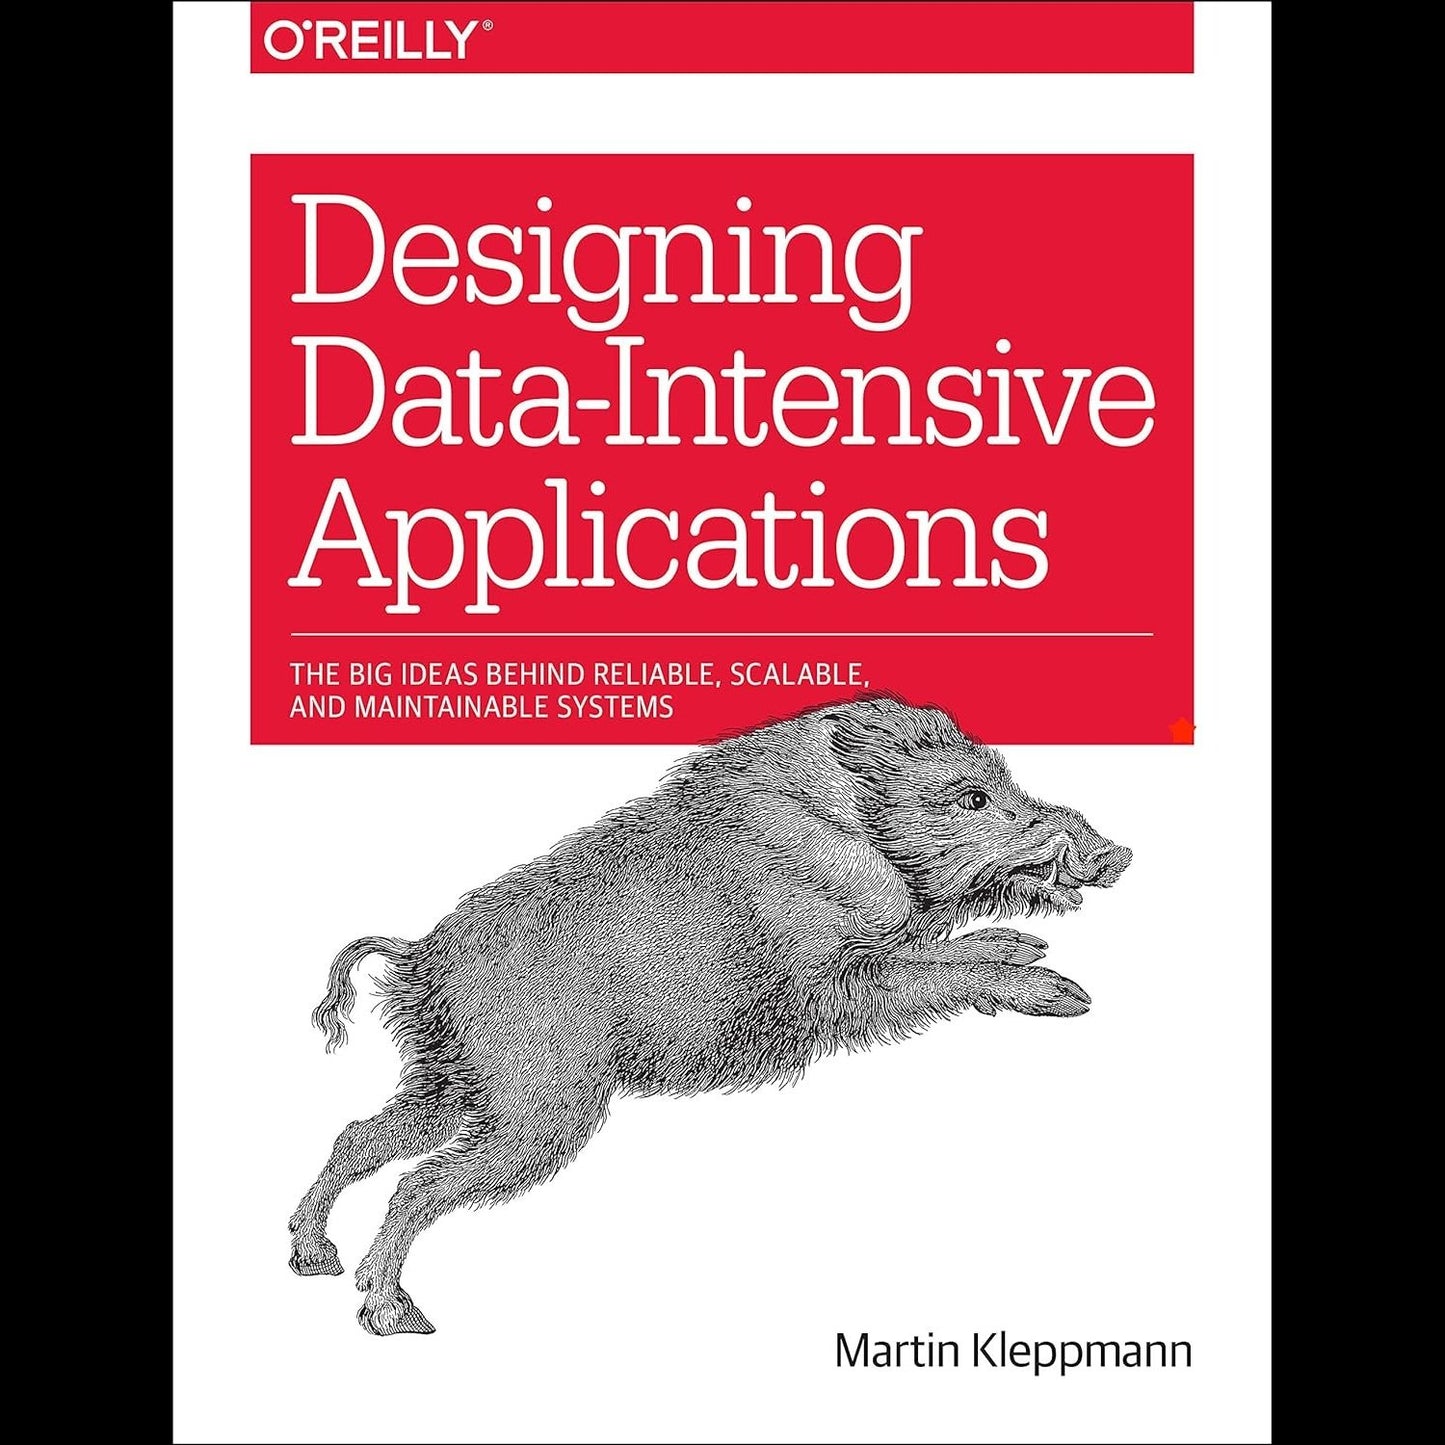 Designing Data-Intensive Applications Paperback – Illustrated, 2 May 2017 by Martin Kleppmann (Author)